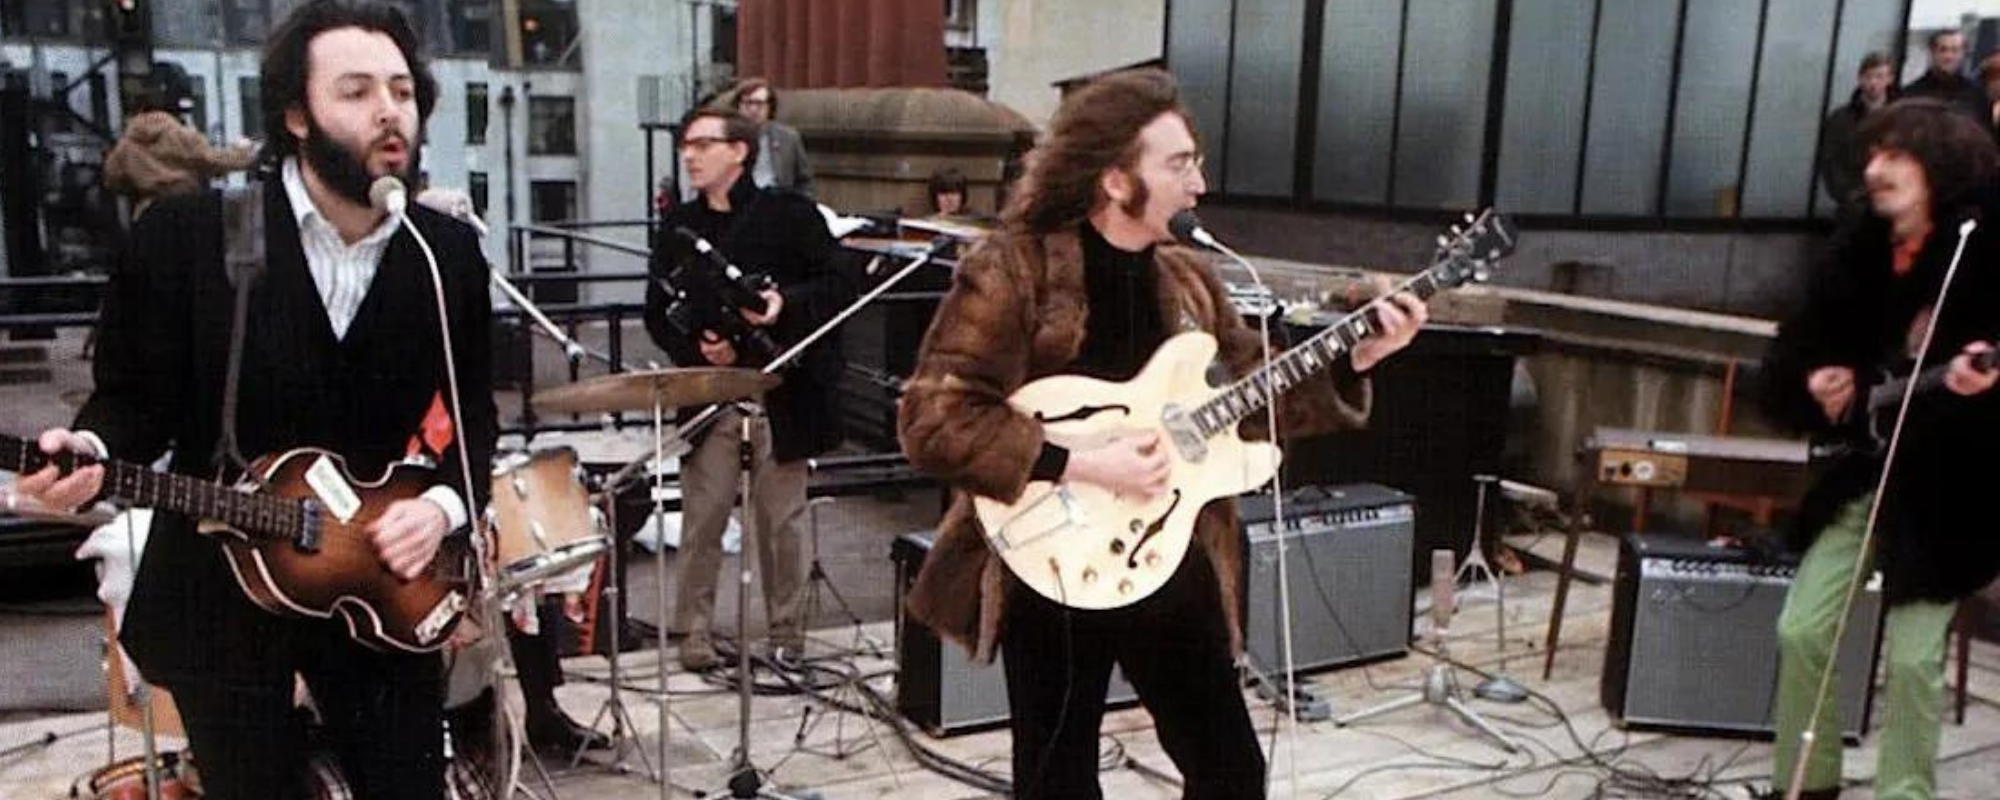 Behind the Song: The Beatles’ Late-Period Standout “Don’t Let Me Down”